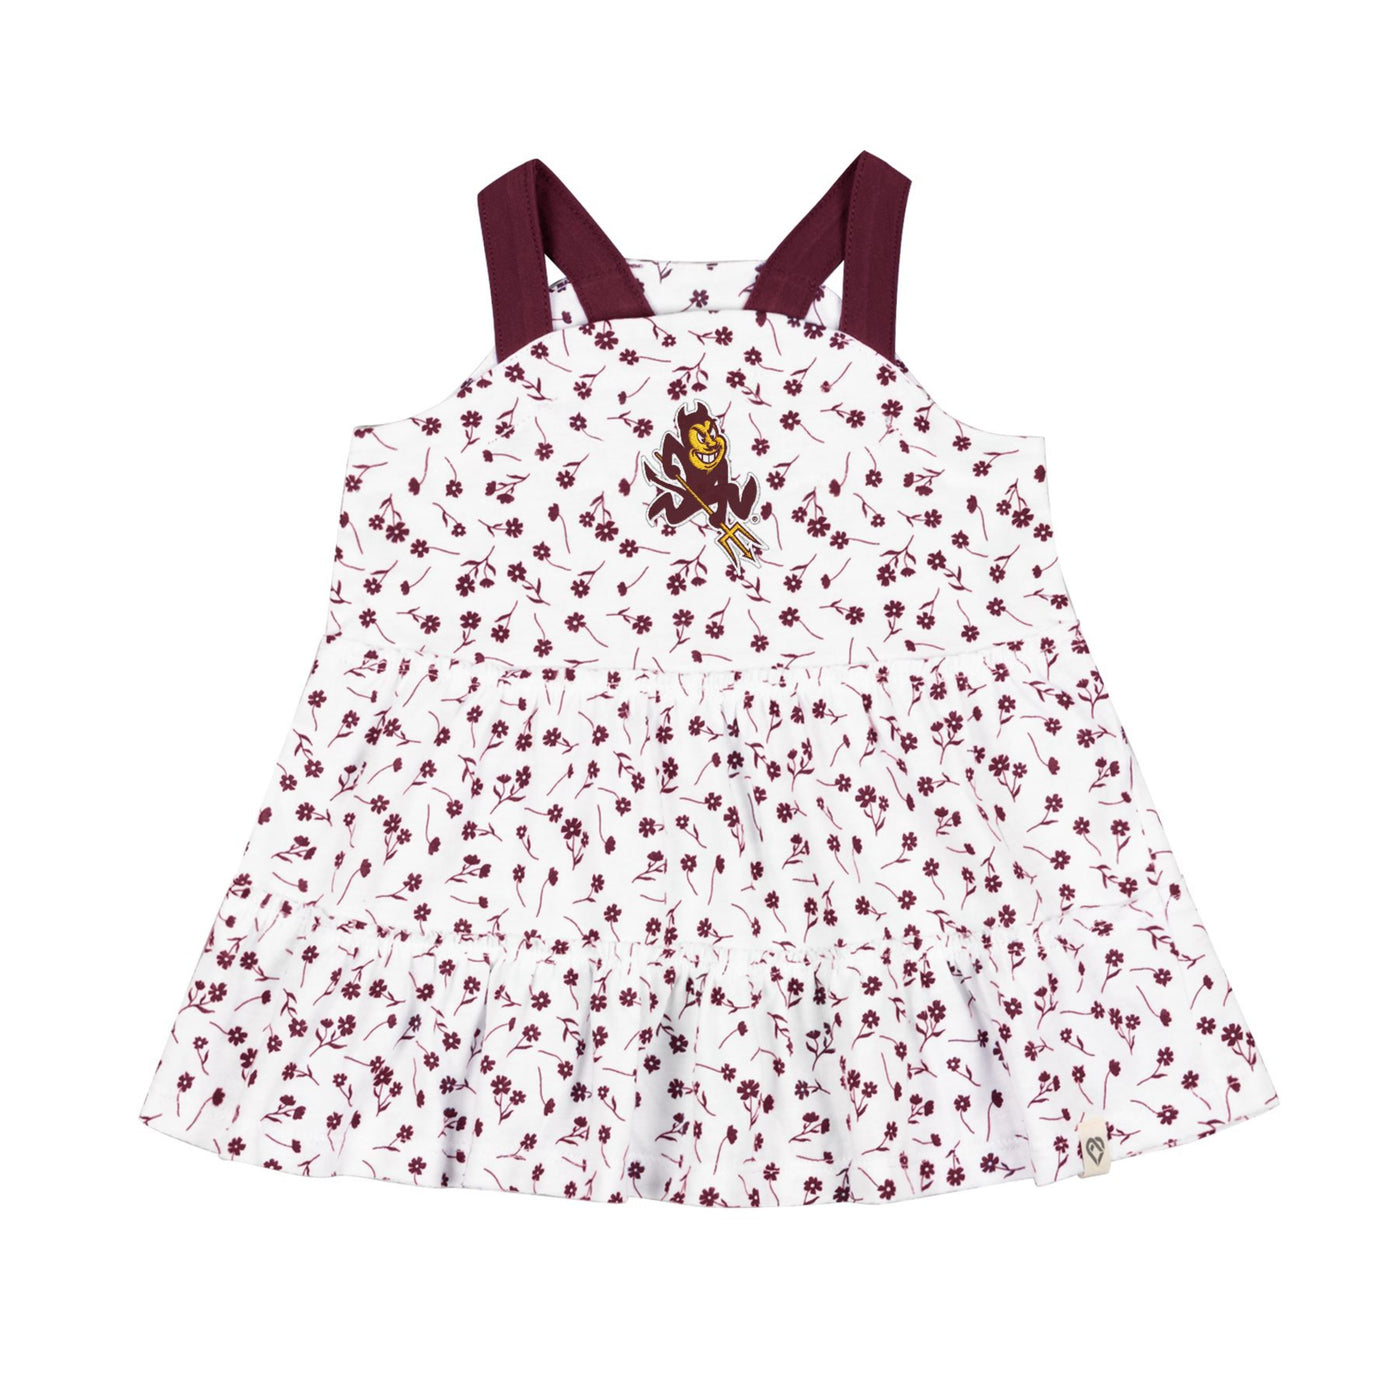 ASU white infant dress with a small maroon flower print. The straps are maroon and there is a small sparky mascot on the center of the chest,